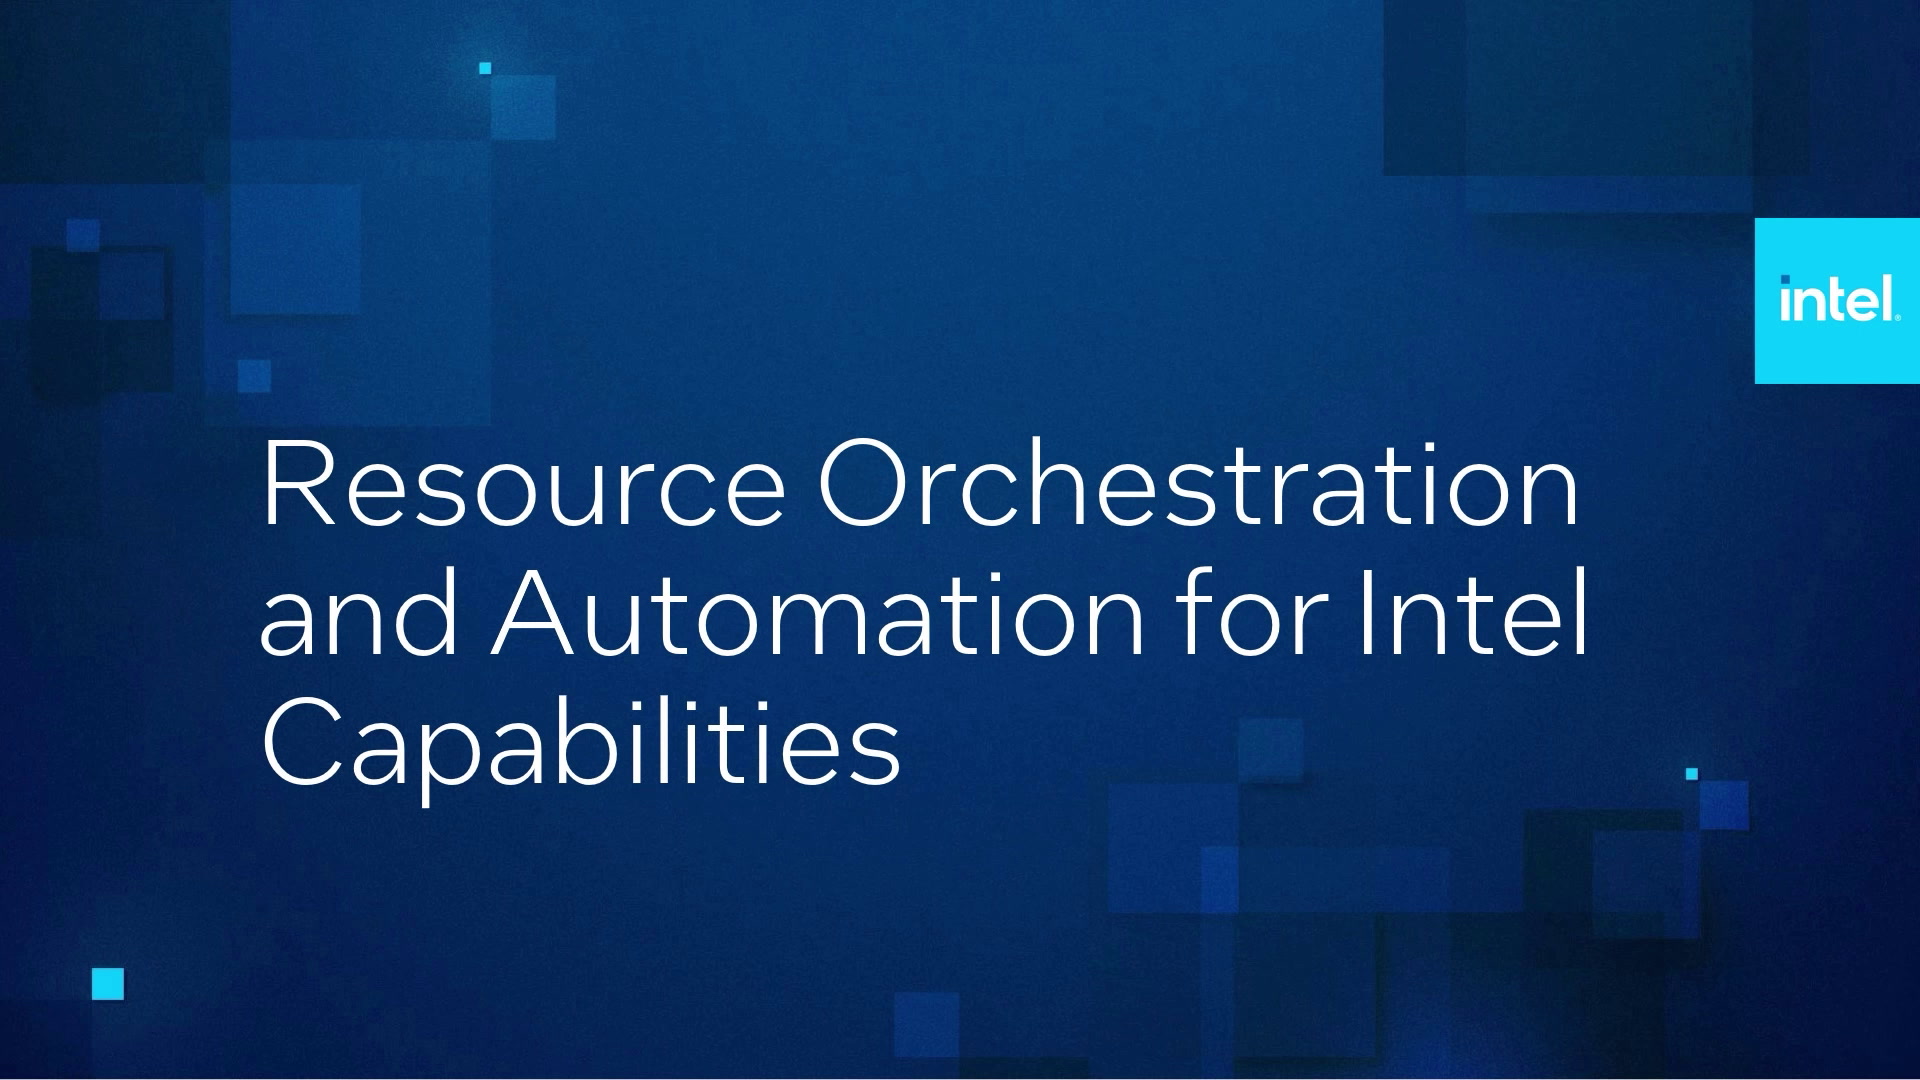 Resource Orchestration and Automation for Intel Capabilities